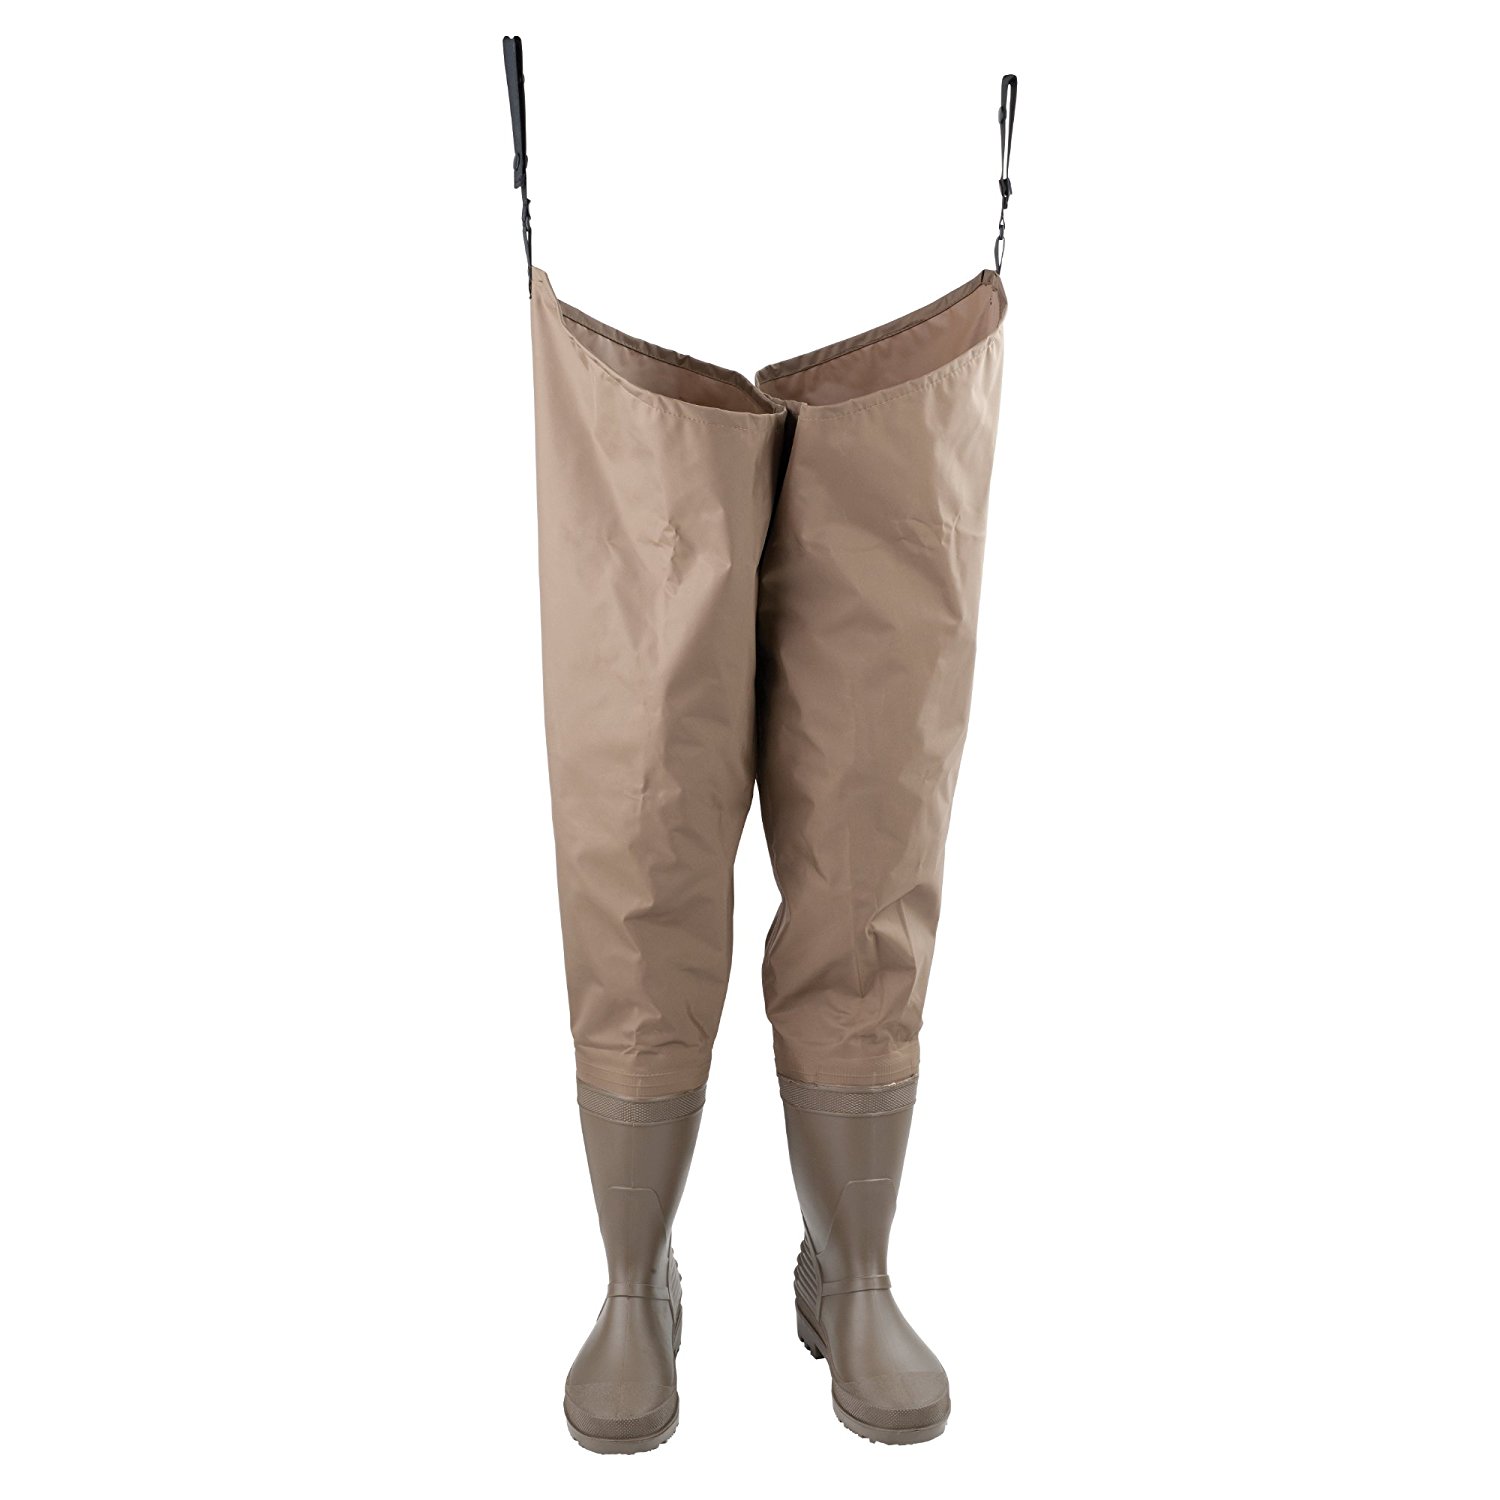 11 Best Hip Waders for Fishing: Compare 